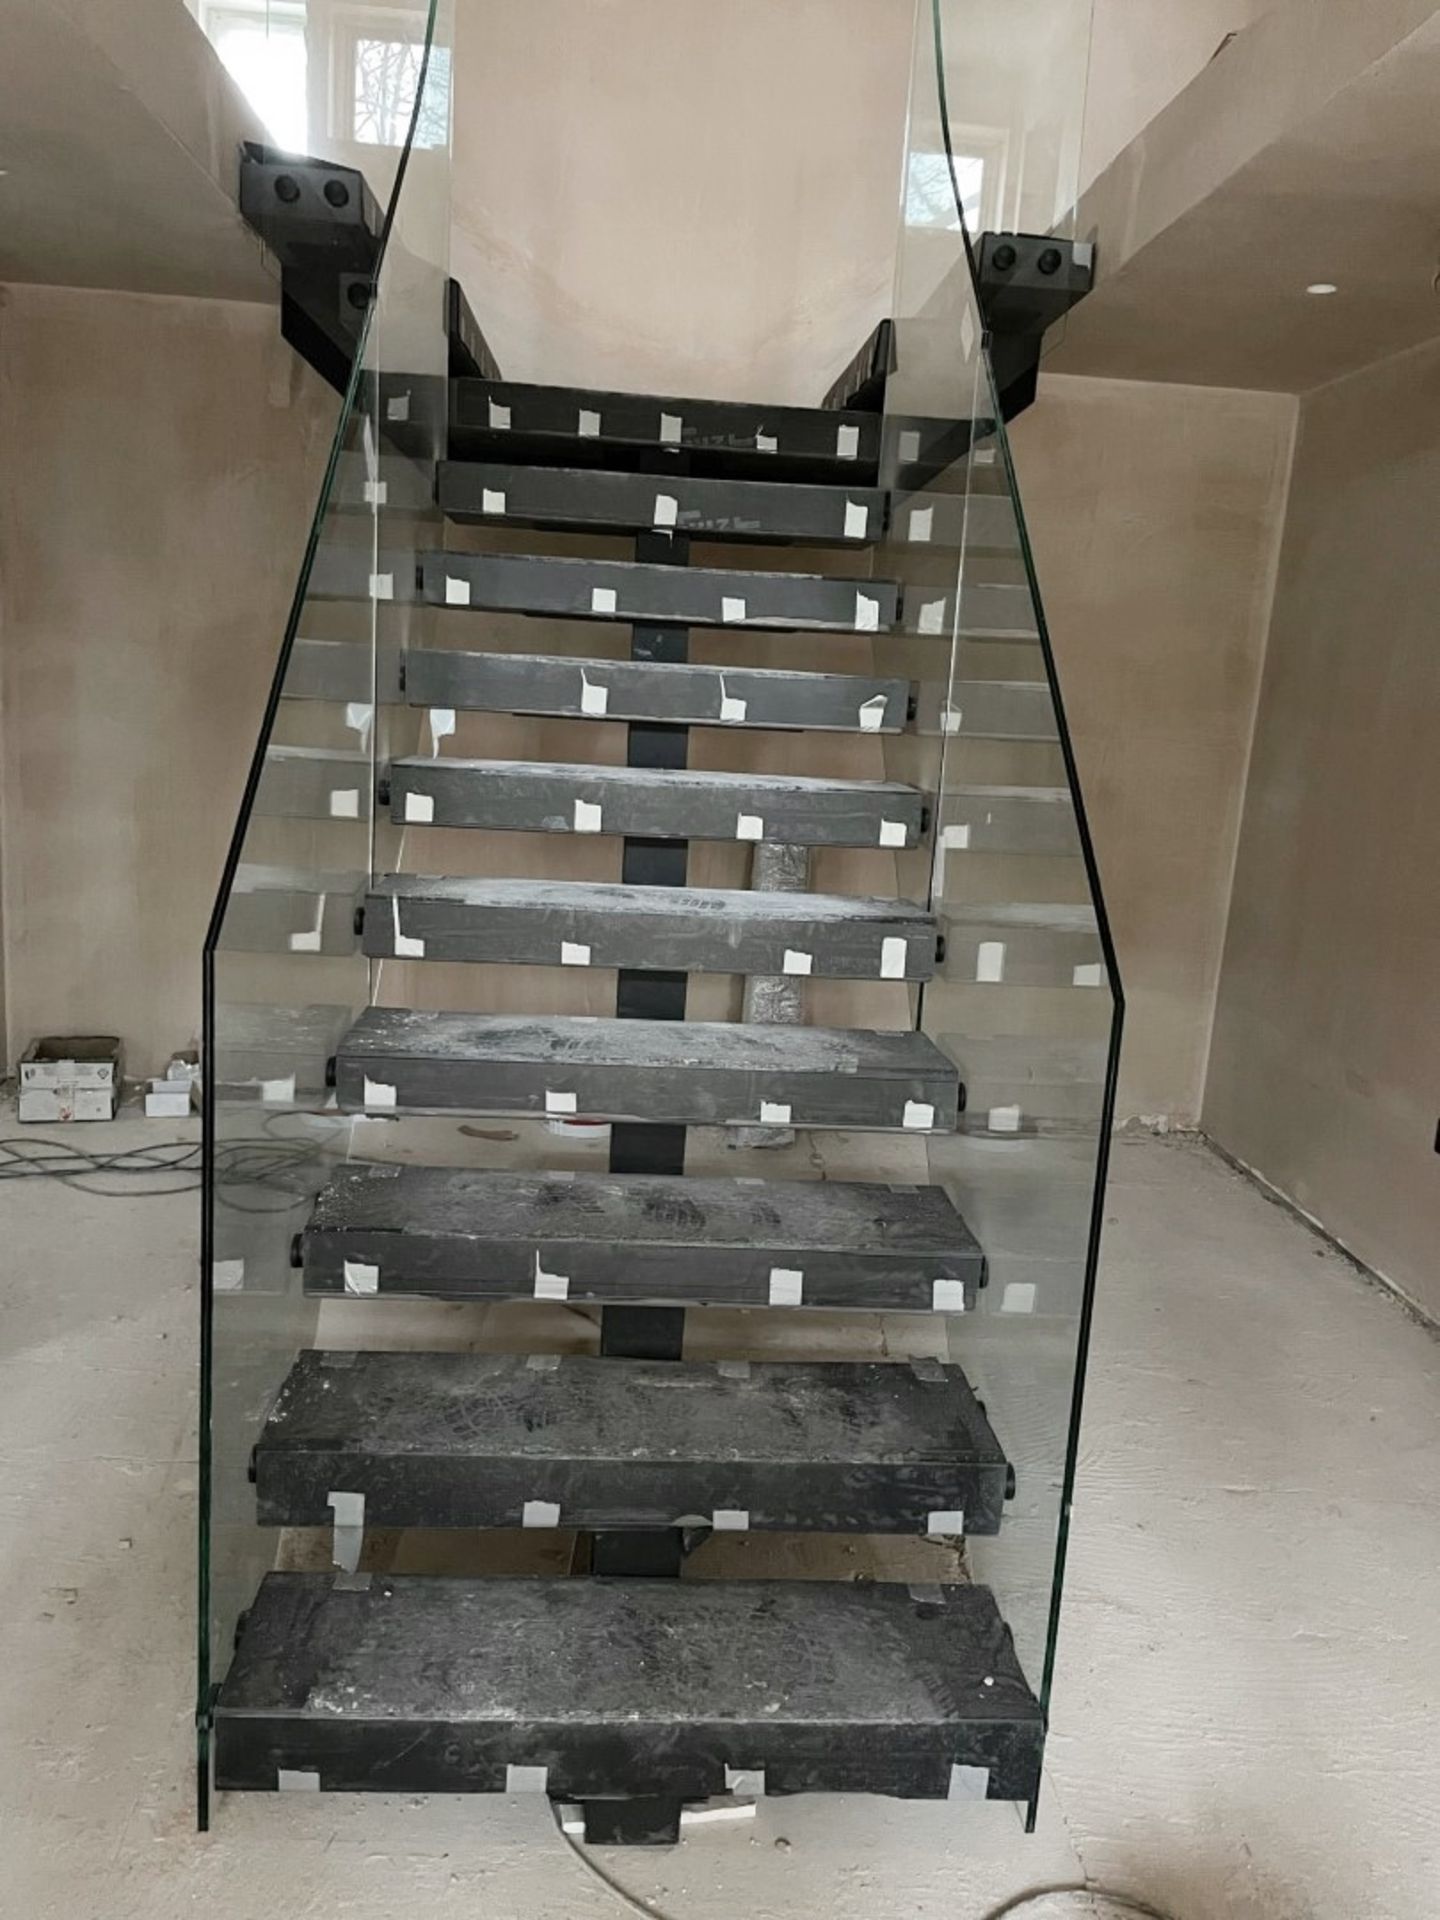 1 x Elegant Glass And Wooden Staircase - More Information To Follow - CL - Location: Greater - Image 4 of 16